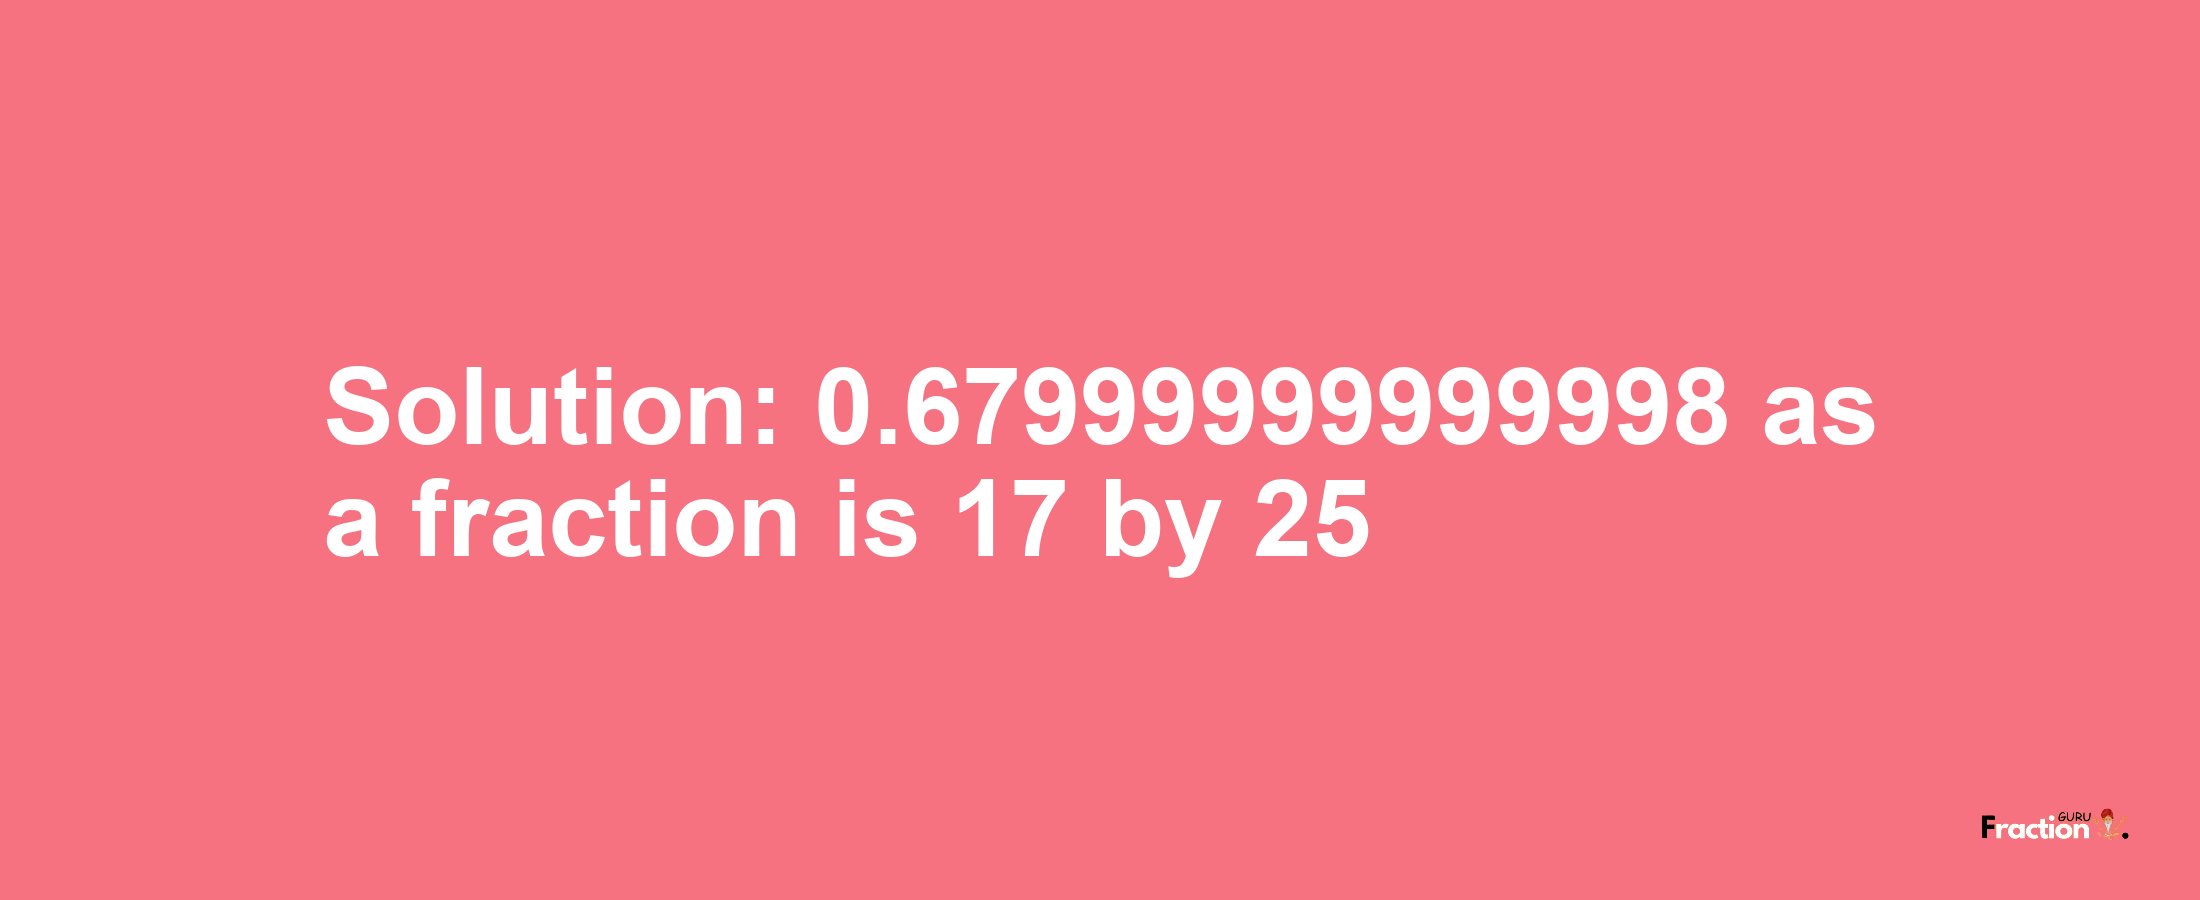 Solution:0.67999999999998 as a fraction is 17/25